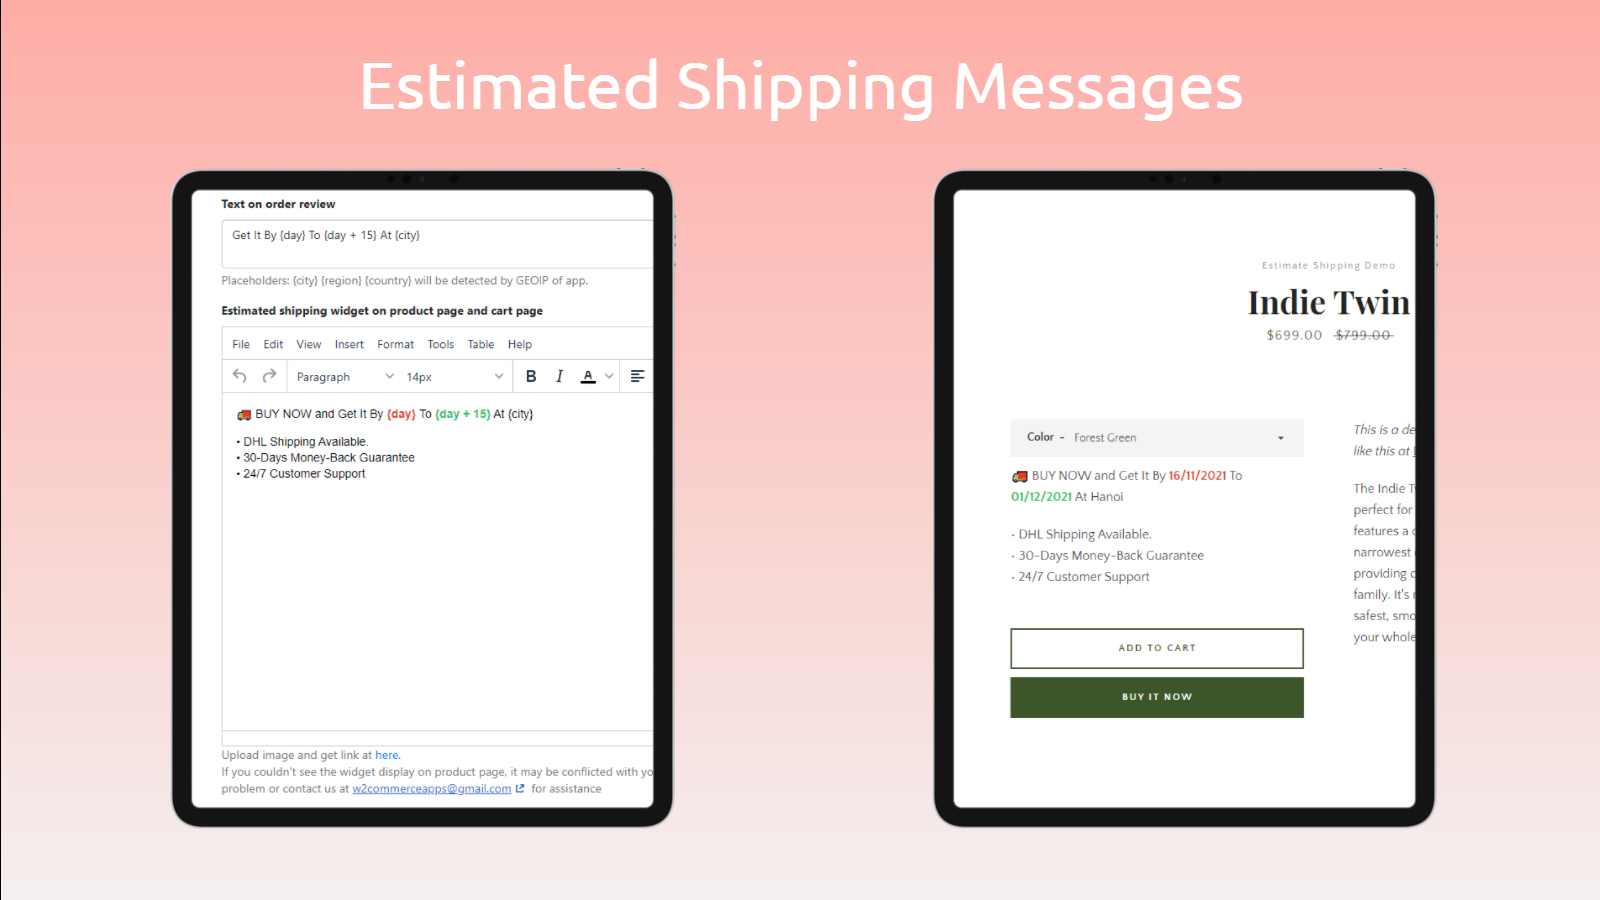 Estimated Shipping Messages